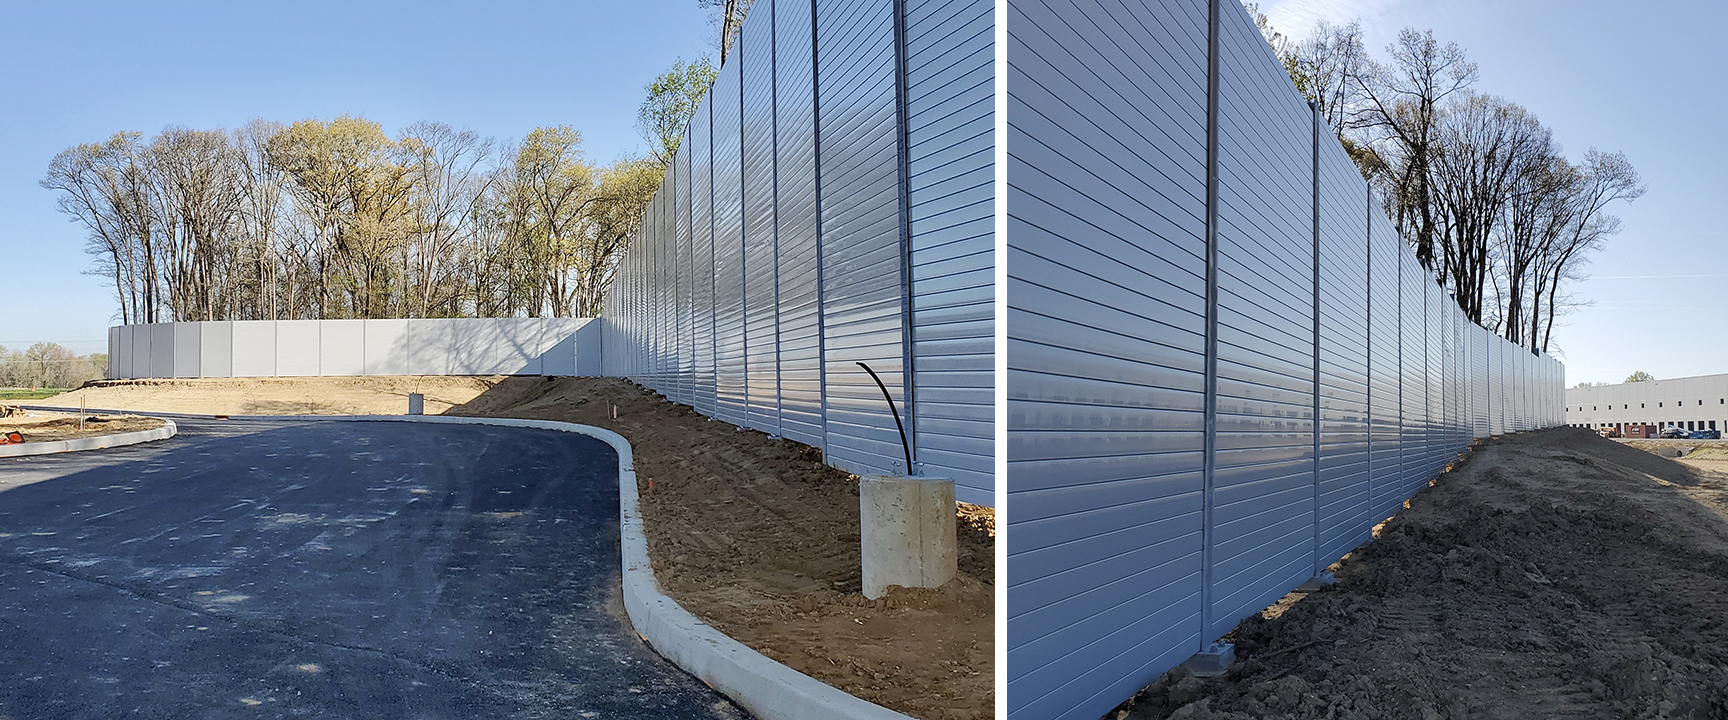 Close-angled views of sound barrier wall at Prologis business center